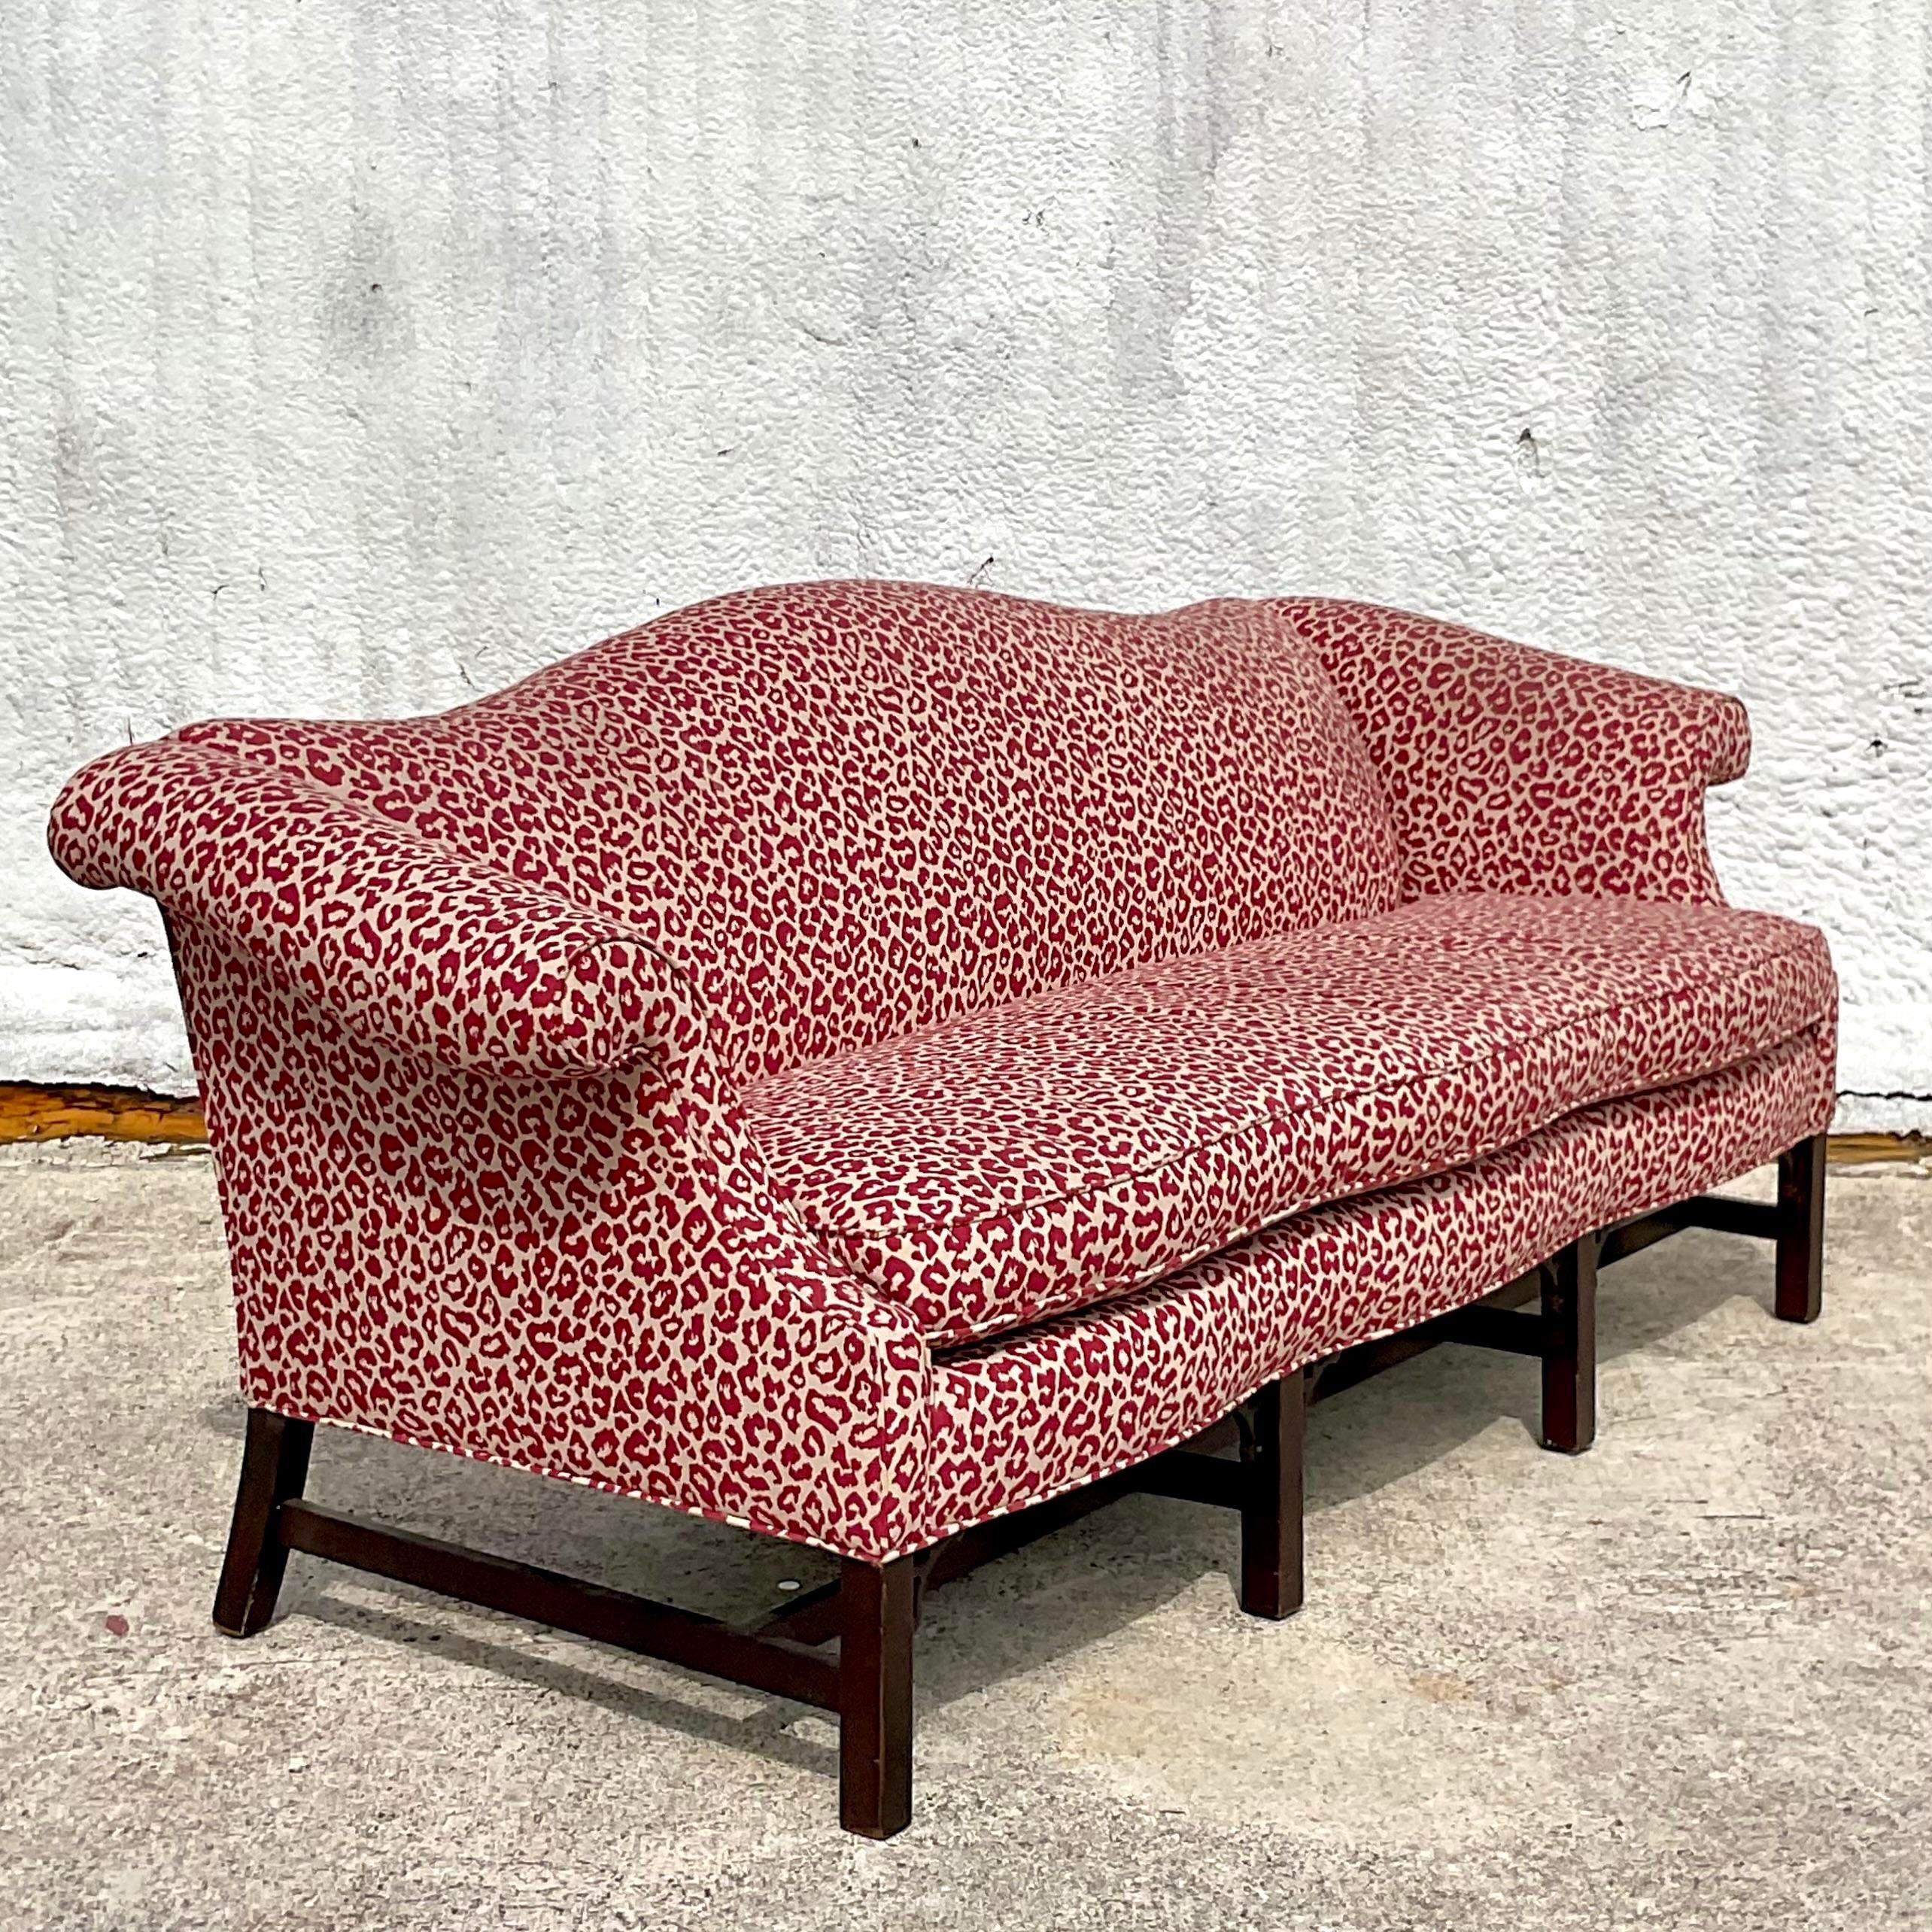 A fantastic vintage Boho camelback sofa. A chic leopard jacquard with beautiful fretwork detail along the wooden frame. Acquired from a Palm Beach estate.